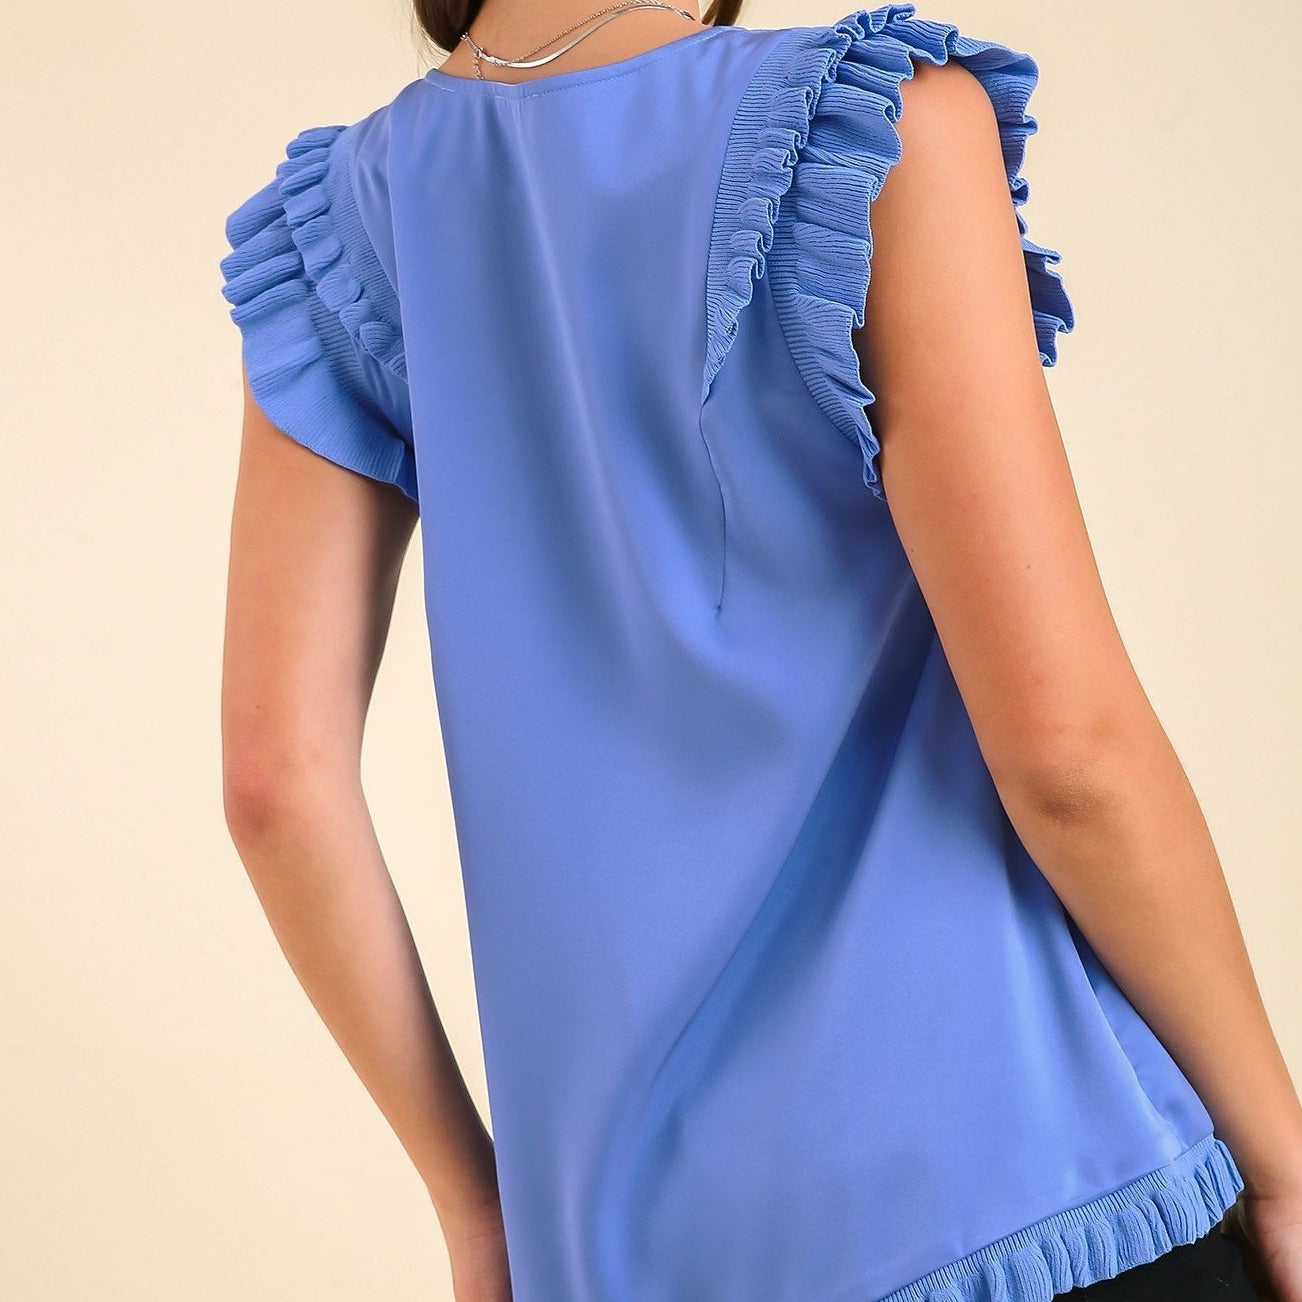 Woven & Jersey Mixed Media Top with Double Ruffle Layered Sleeves